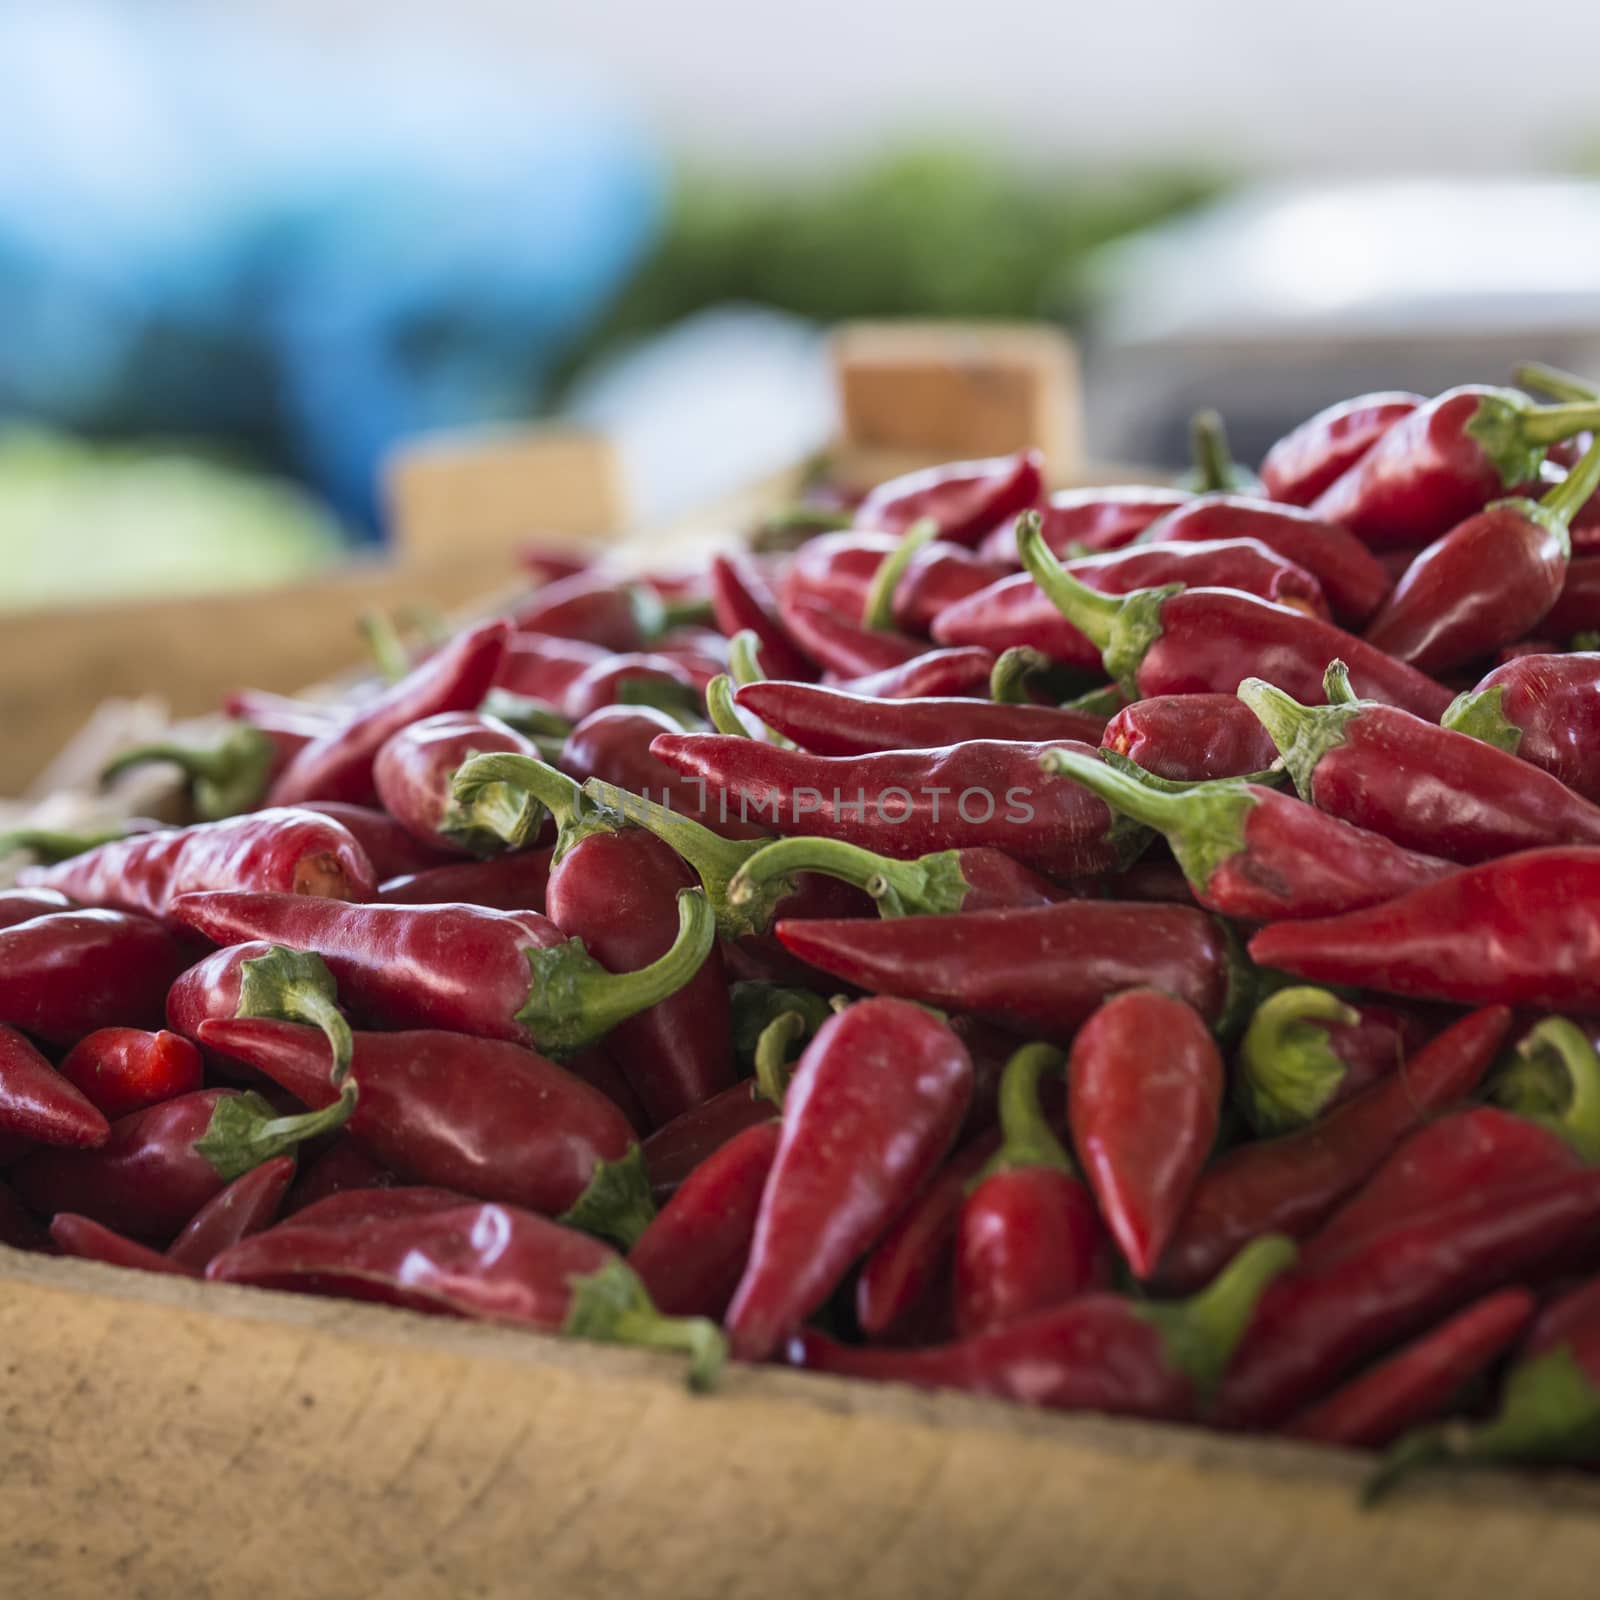 The picture shows a pile of small, red, very hot and spicy chilli peppers on an asian market.